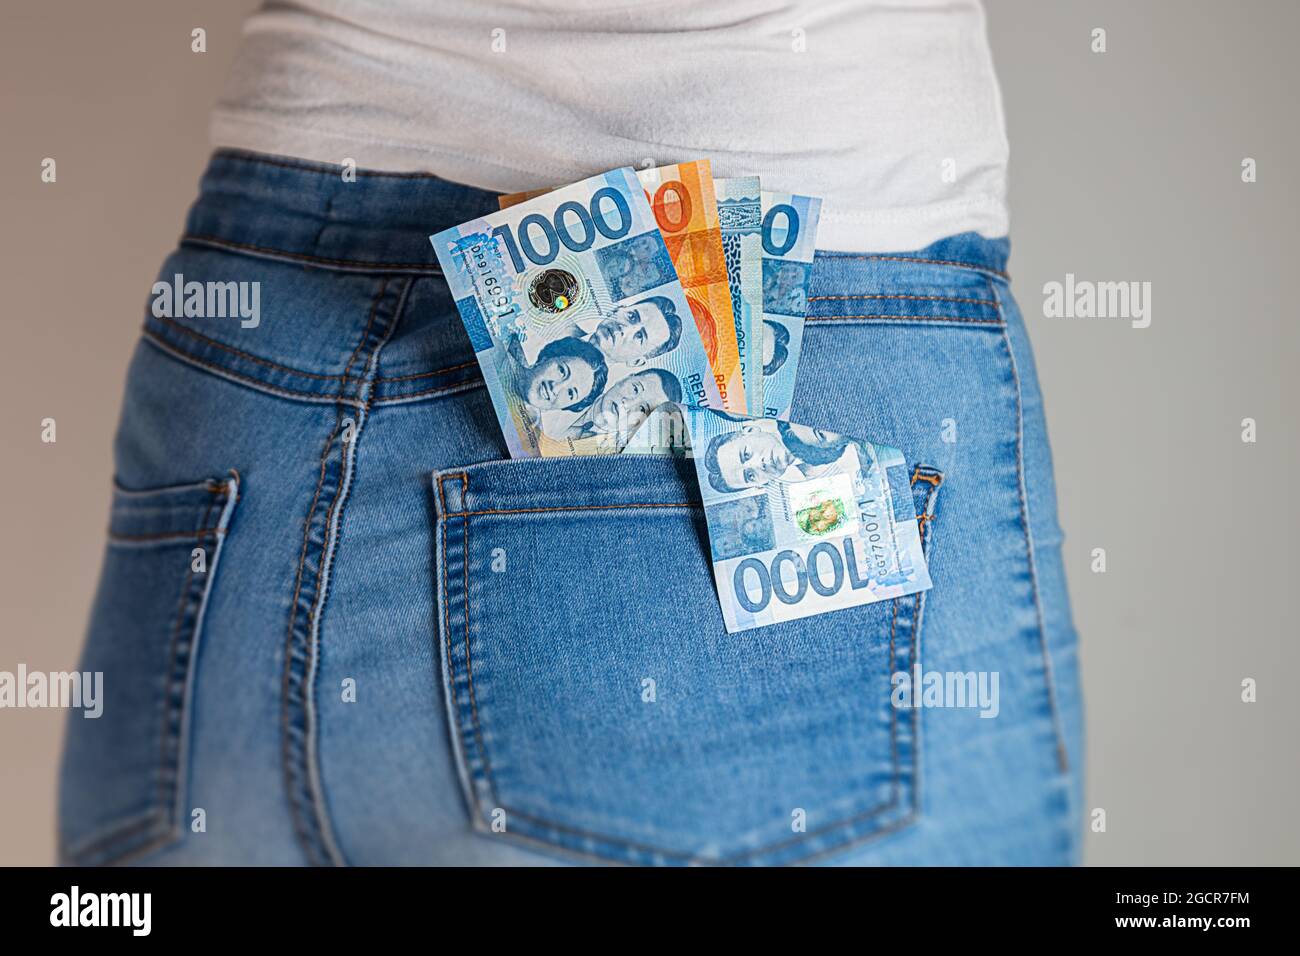 Philippines Peso in a female jeans pocket. Philippine pesos notes stuck in a woman jeans pocket. Pesos in a girl's denim pants buttock pocket. Money i Stock Photo